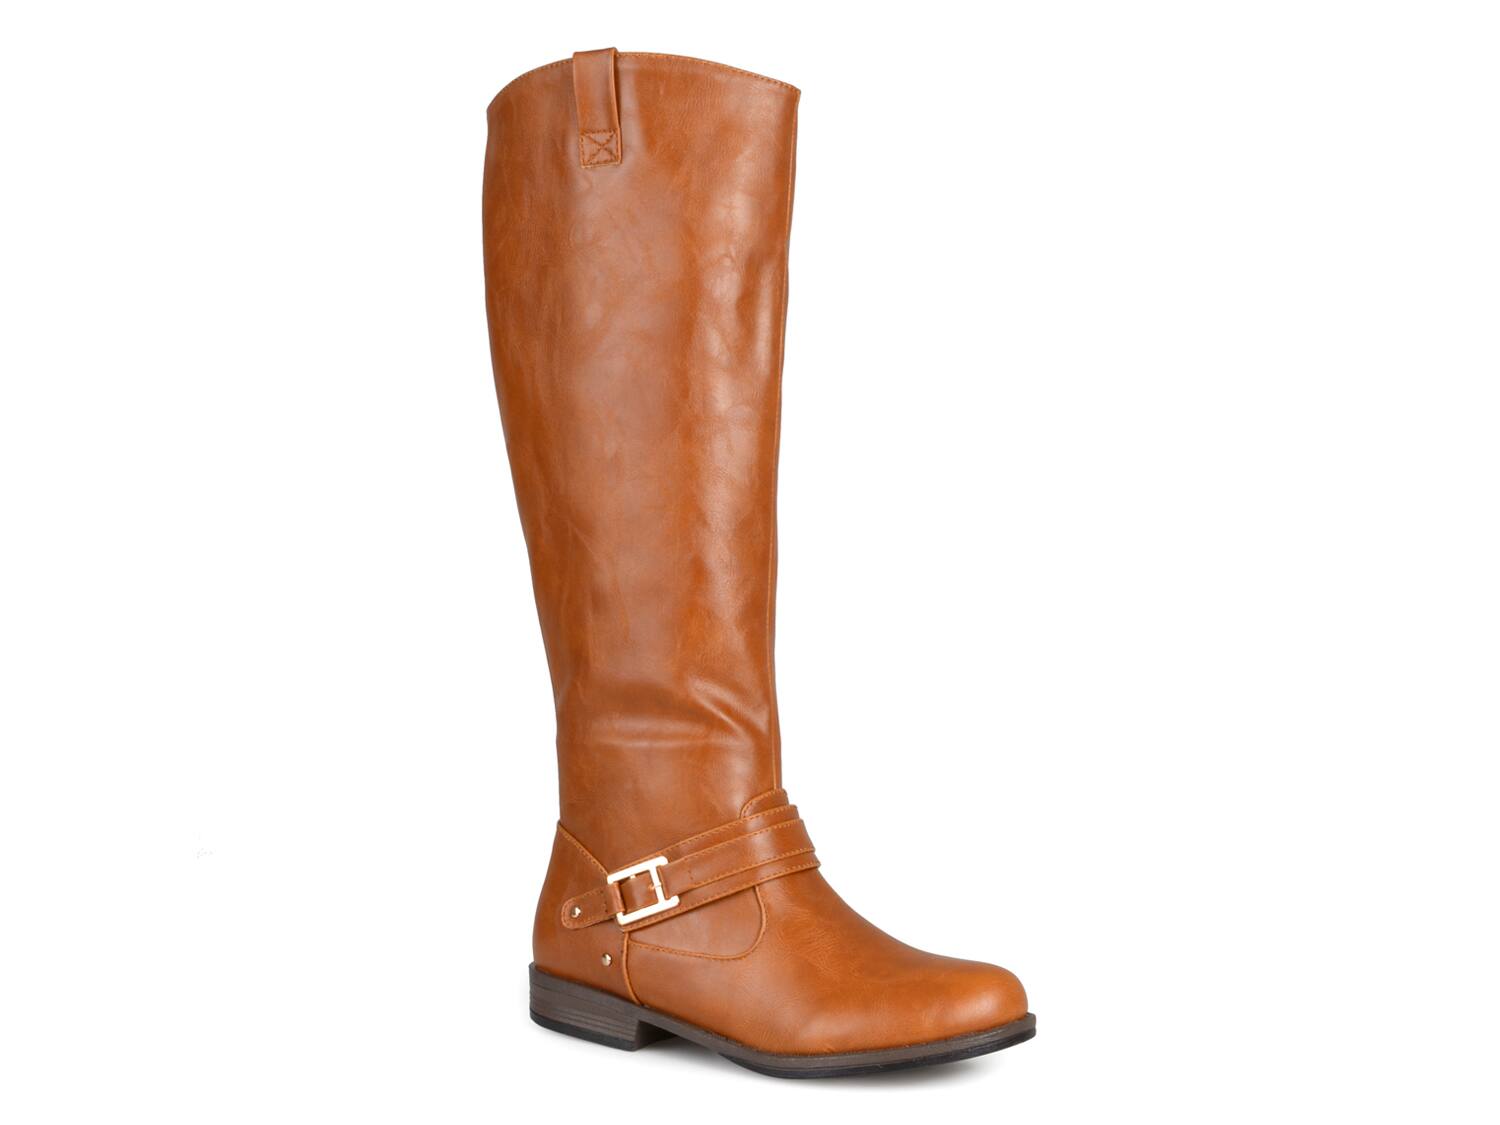 Journee Collection Kai Wide Calf Riding Boot - Free Shipping | DSW